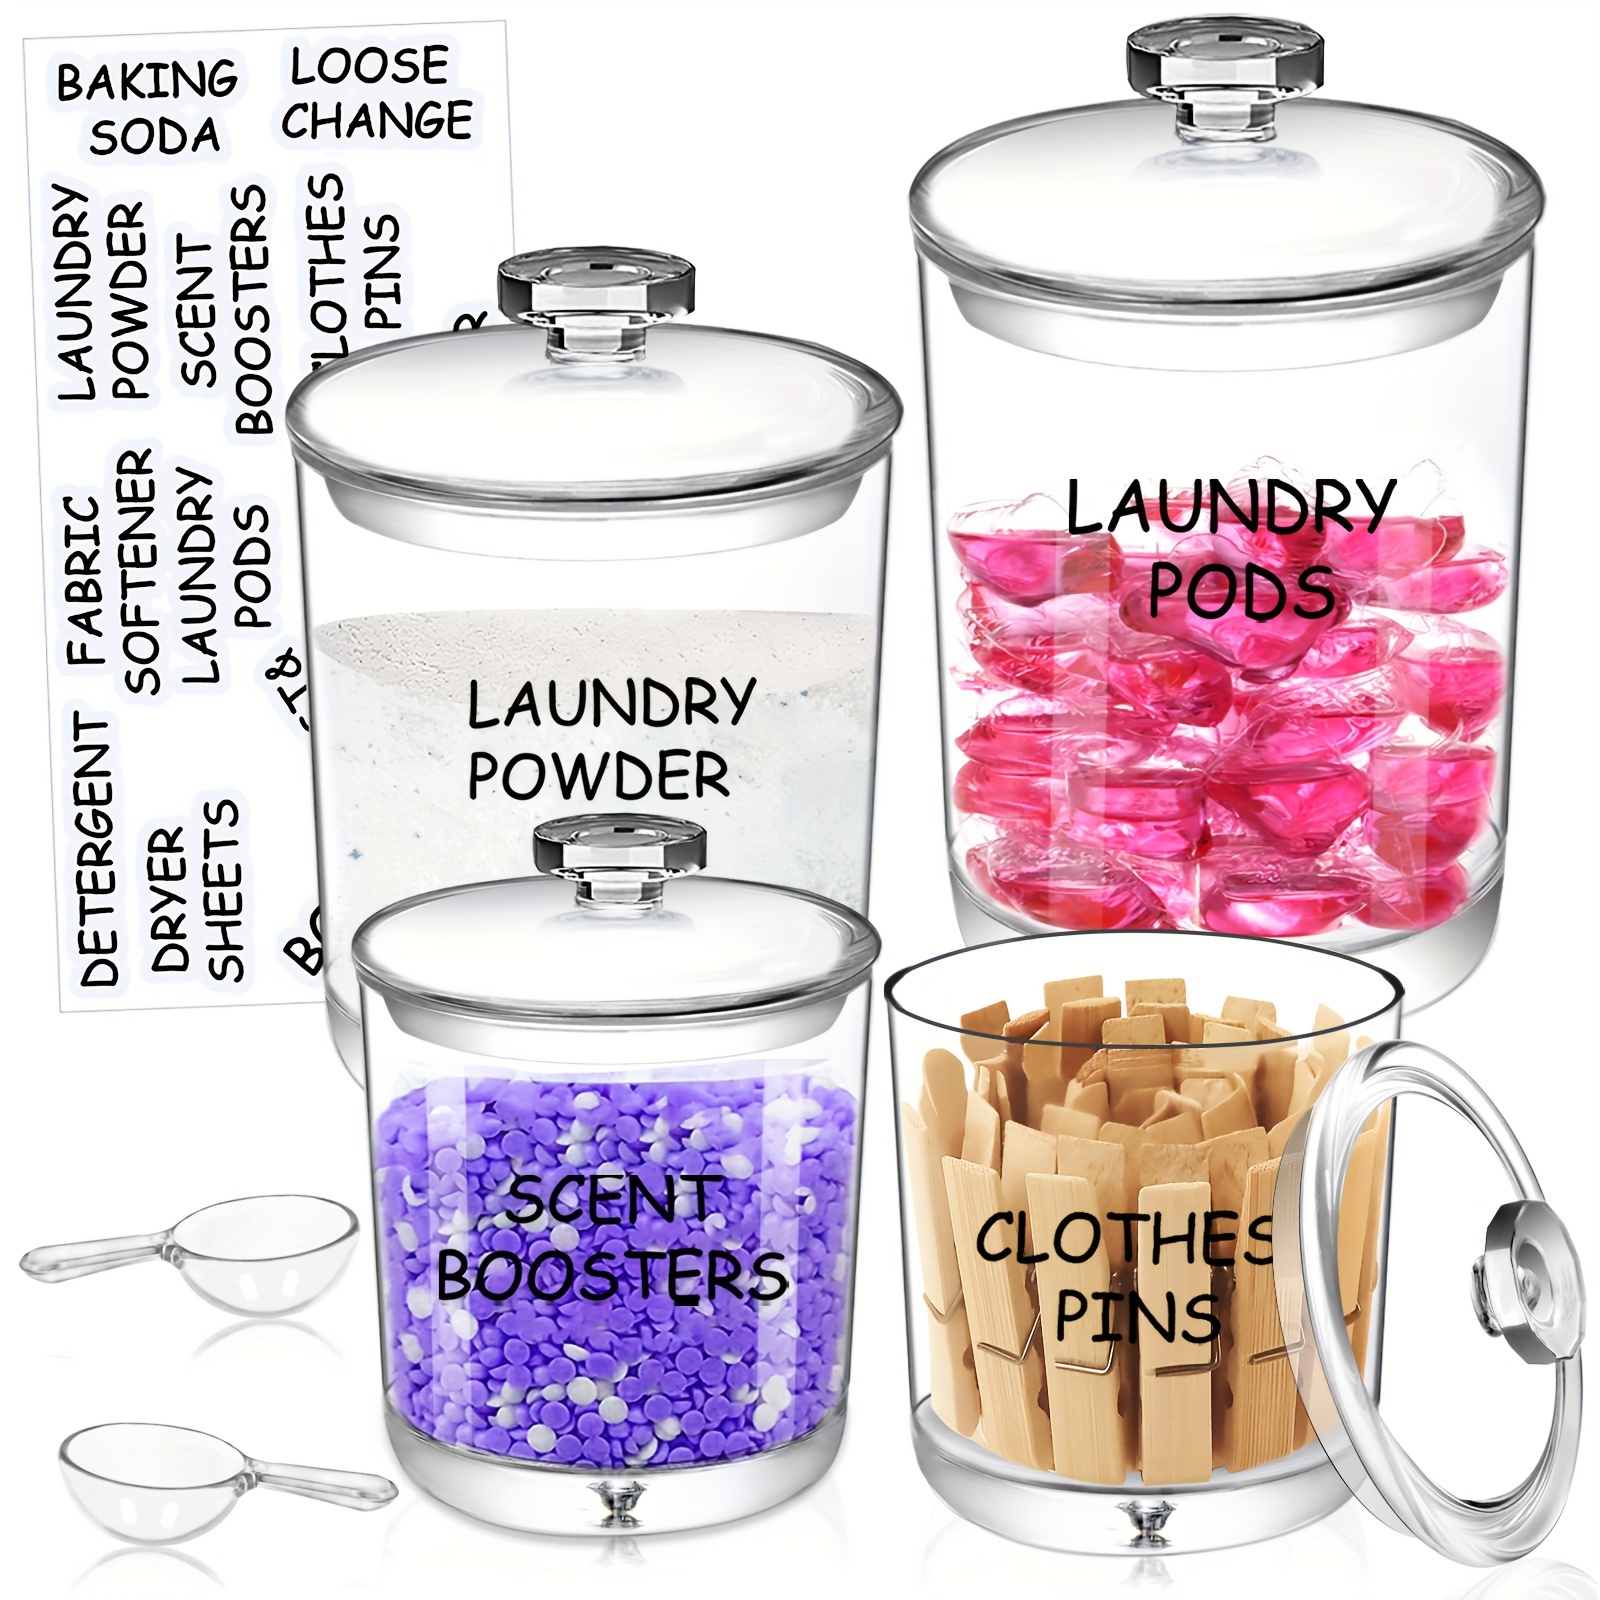 

4pcs Acrylic Laundry Room Organization Jars, 4pcs For Organizing With 2 Scoops & Labels, Clear Laundry Jars For Detergent Powder, Dryer Balls, Pods, Scent Boosters, Laundry Room Storage Box